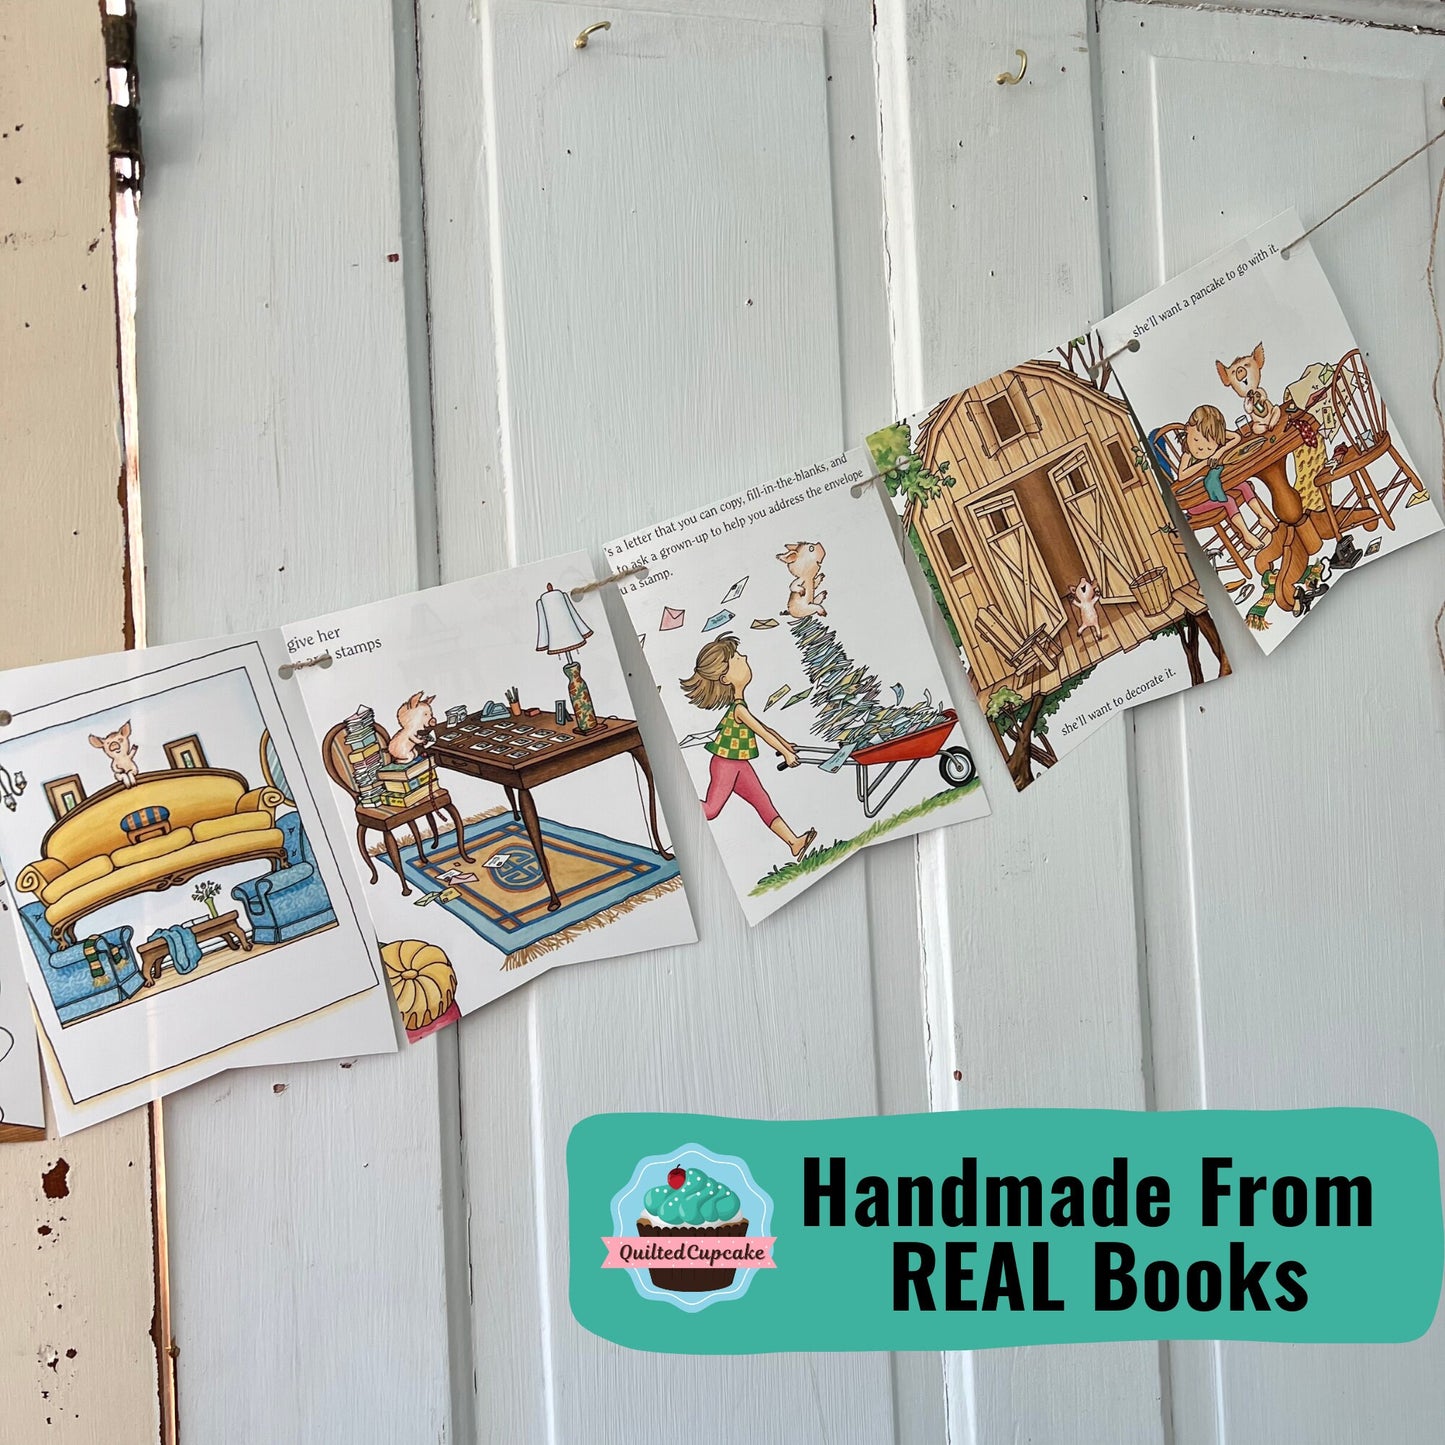 If You Give a Pig a Pancake Banner/Story Book Page Garland /12 Bunting Pennants for Pig a Pancake Birthday Party/READY to SHIP